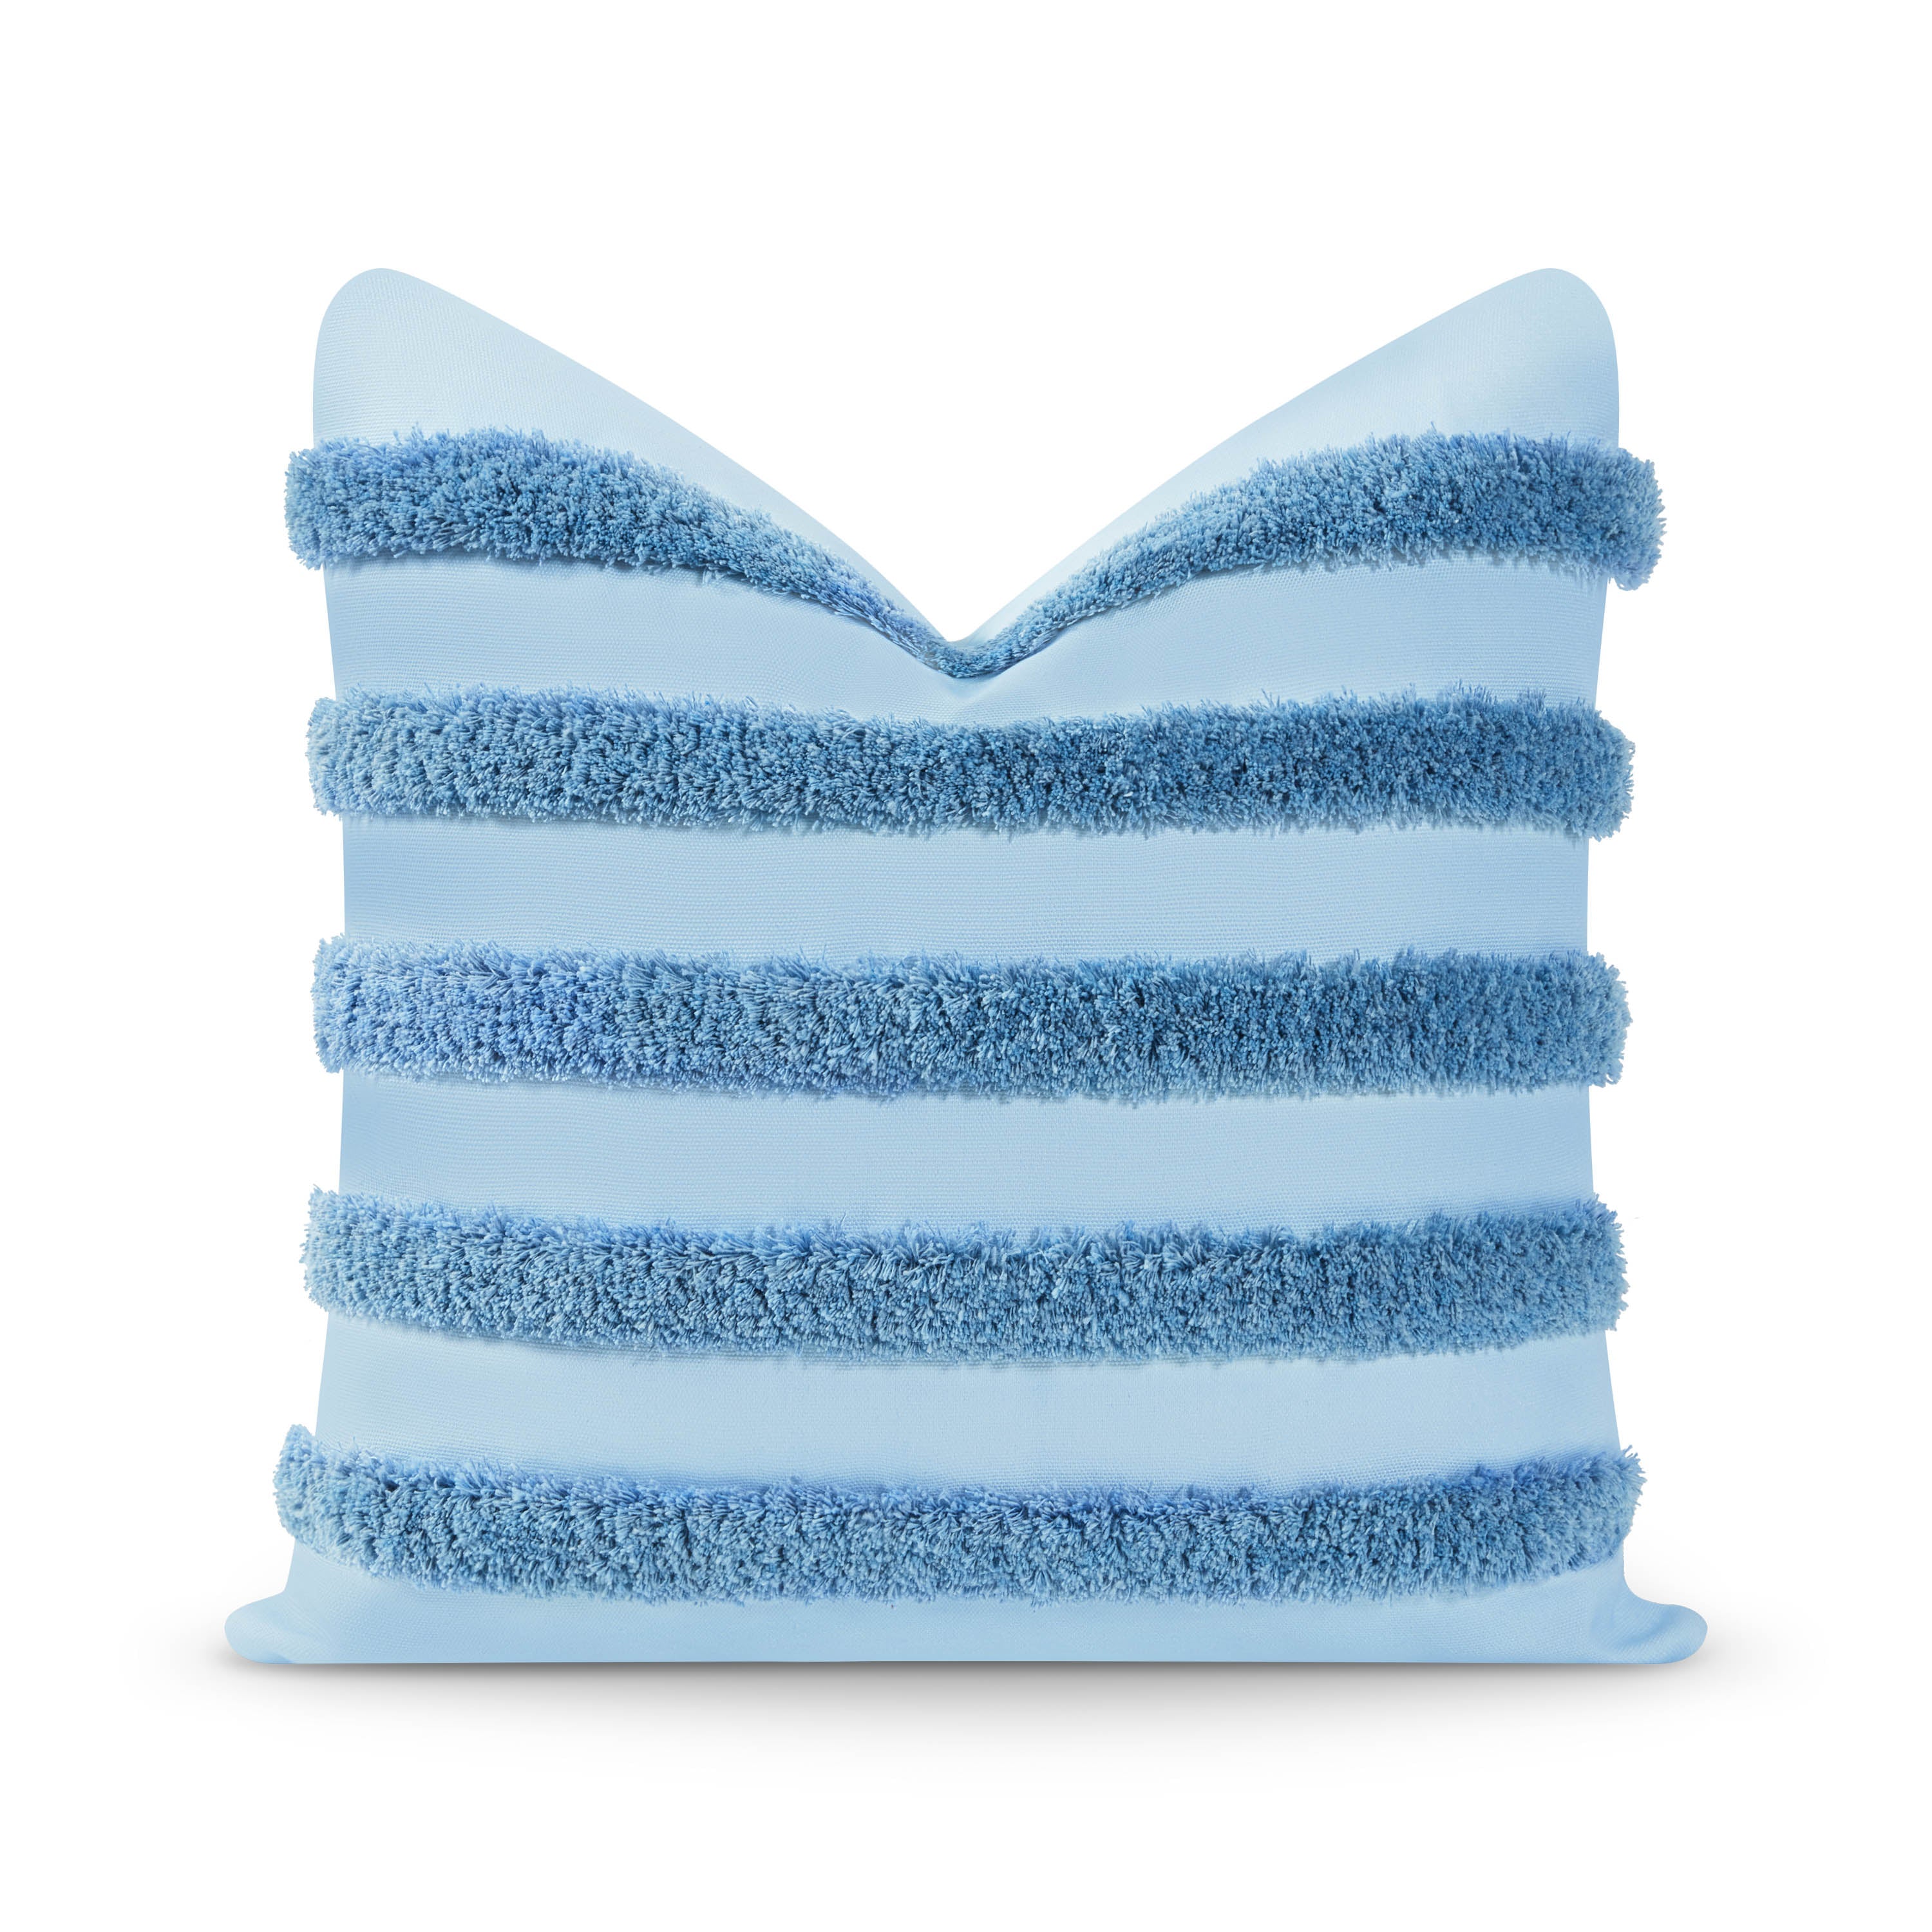 Coastal Hampton Style Indoor Outdoor Throw Pillow Cover, Fluffy Stripes, Baby Blue, 18"x18"